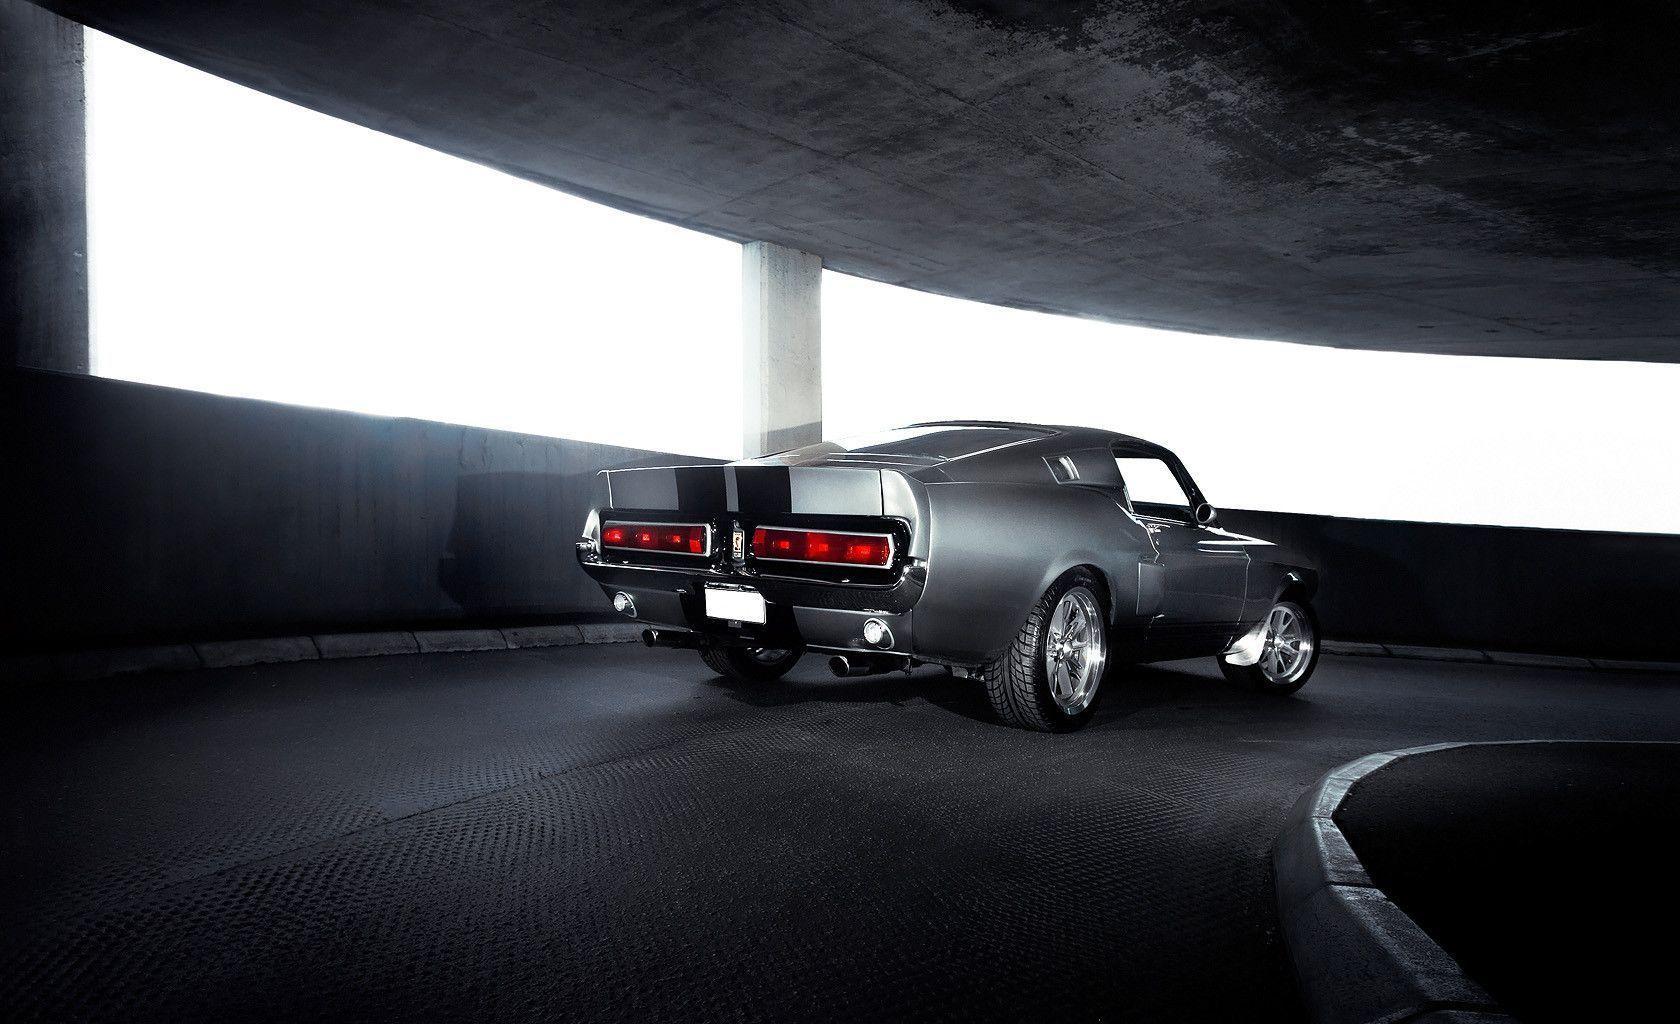 Ford Mustang GT500 Eleanor Holy Drift Car Wallpaper and Videos